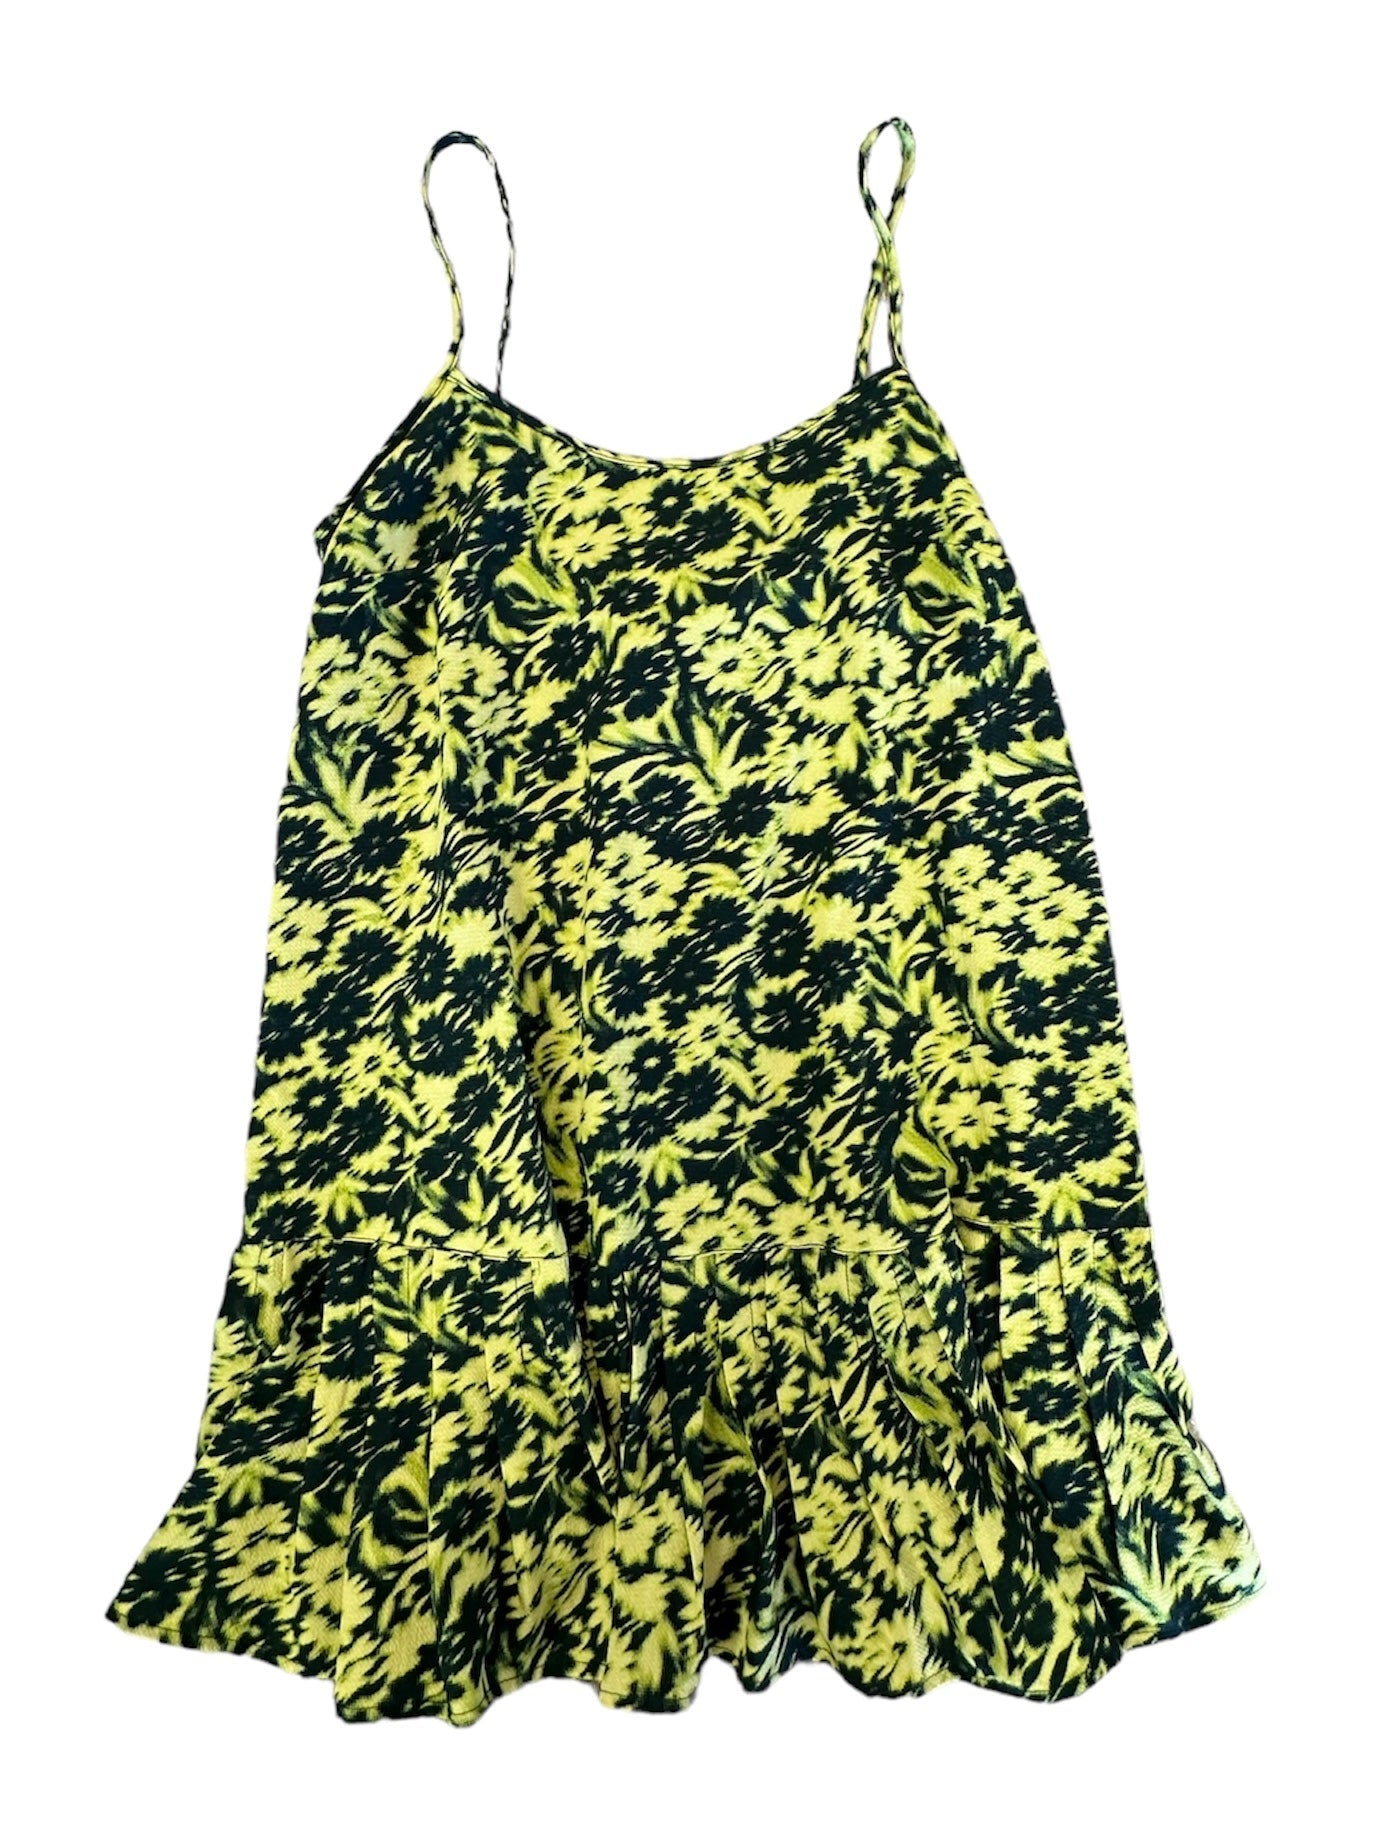 Black & Yellow Dress Casual Short Urban Outfitters, Size S